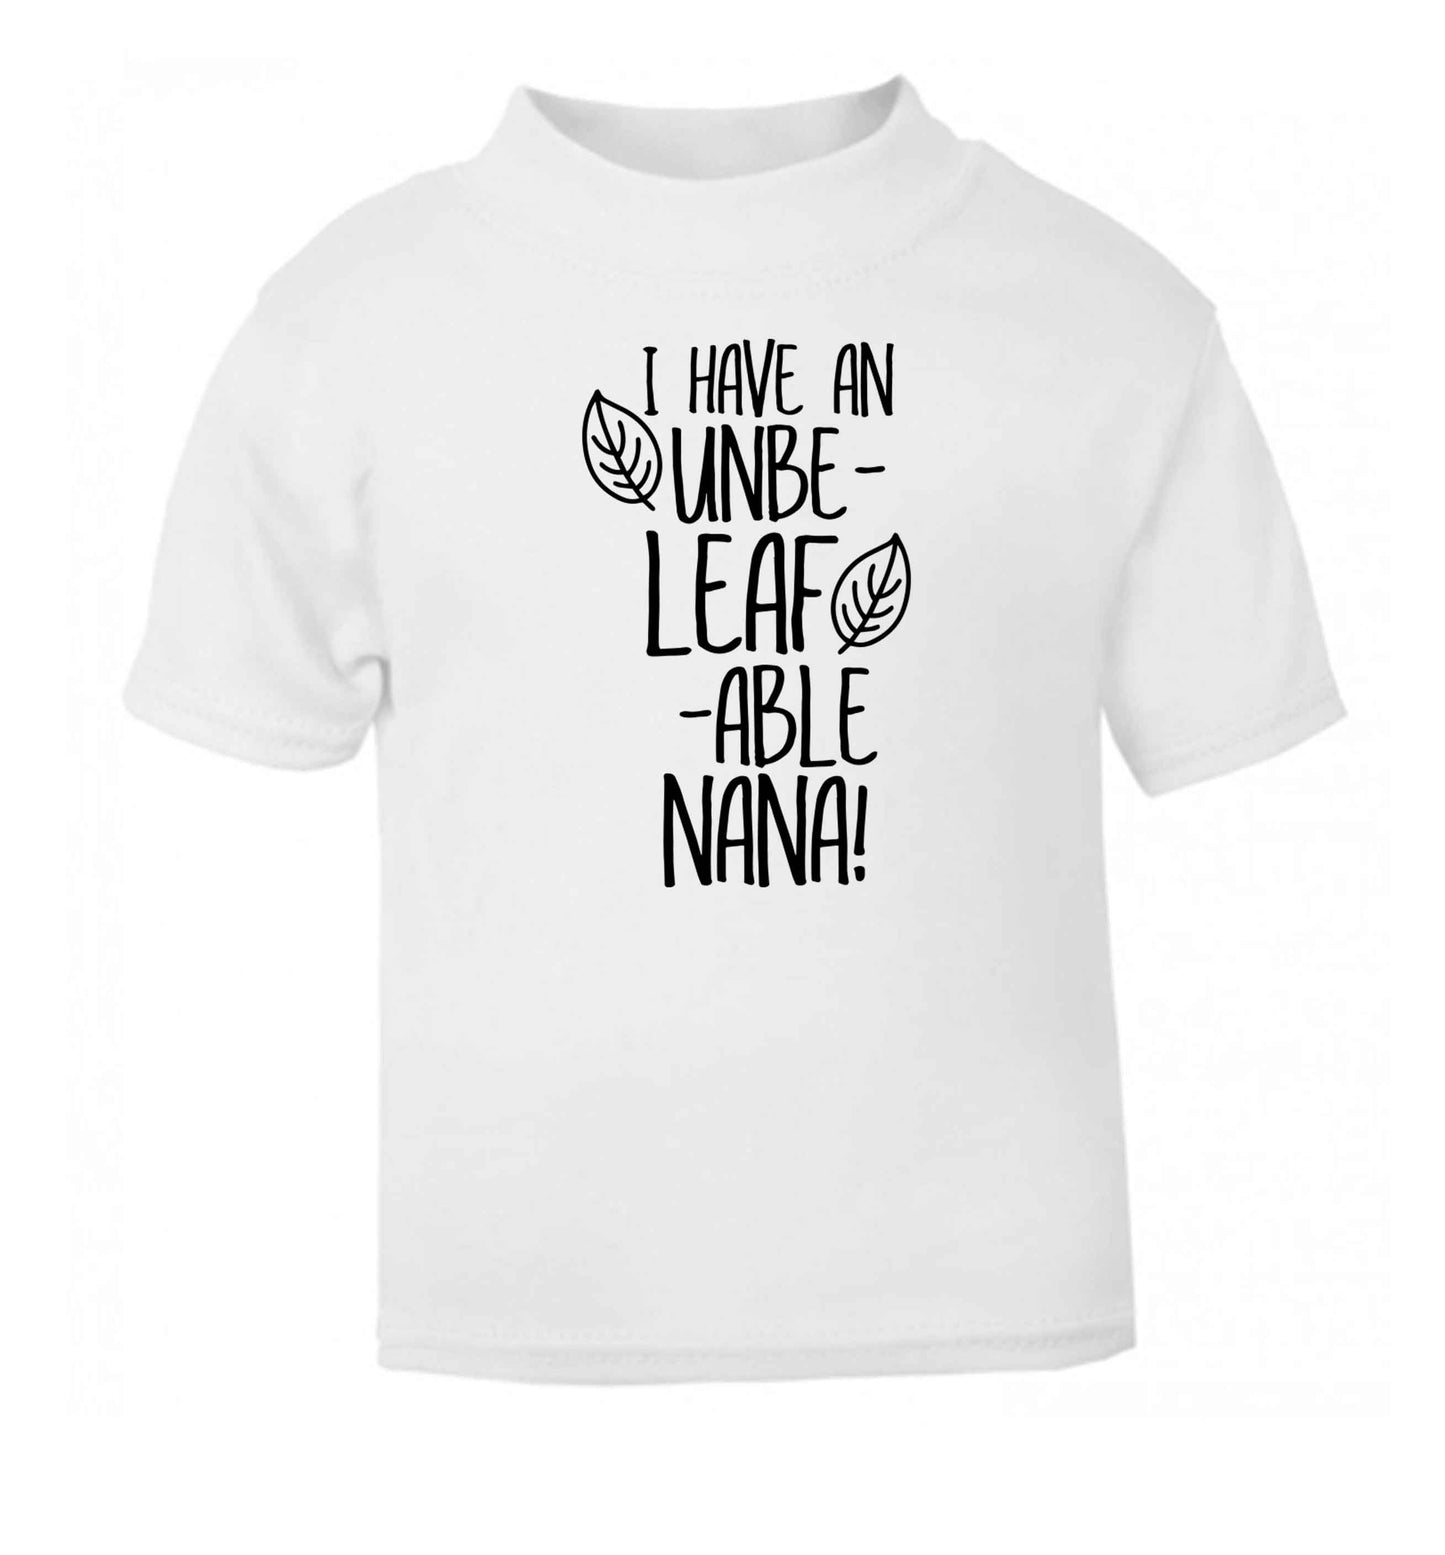 I have an unbe-leaf-able nana white Baby Toddler Tshirt 2 Years